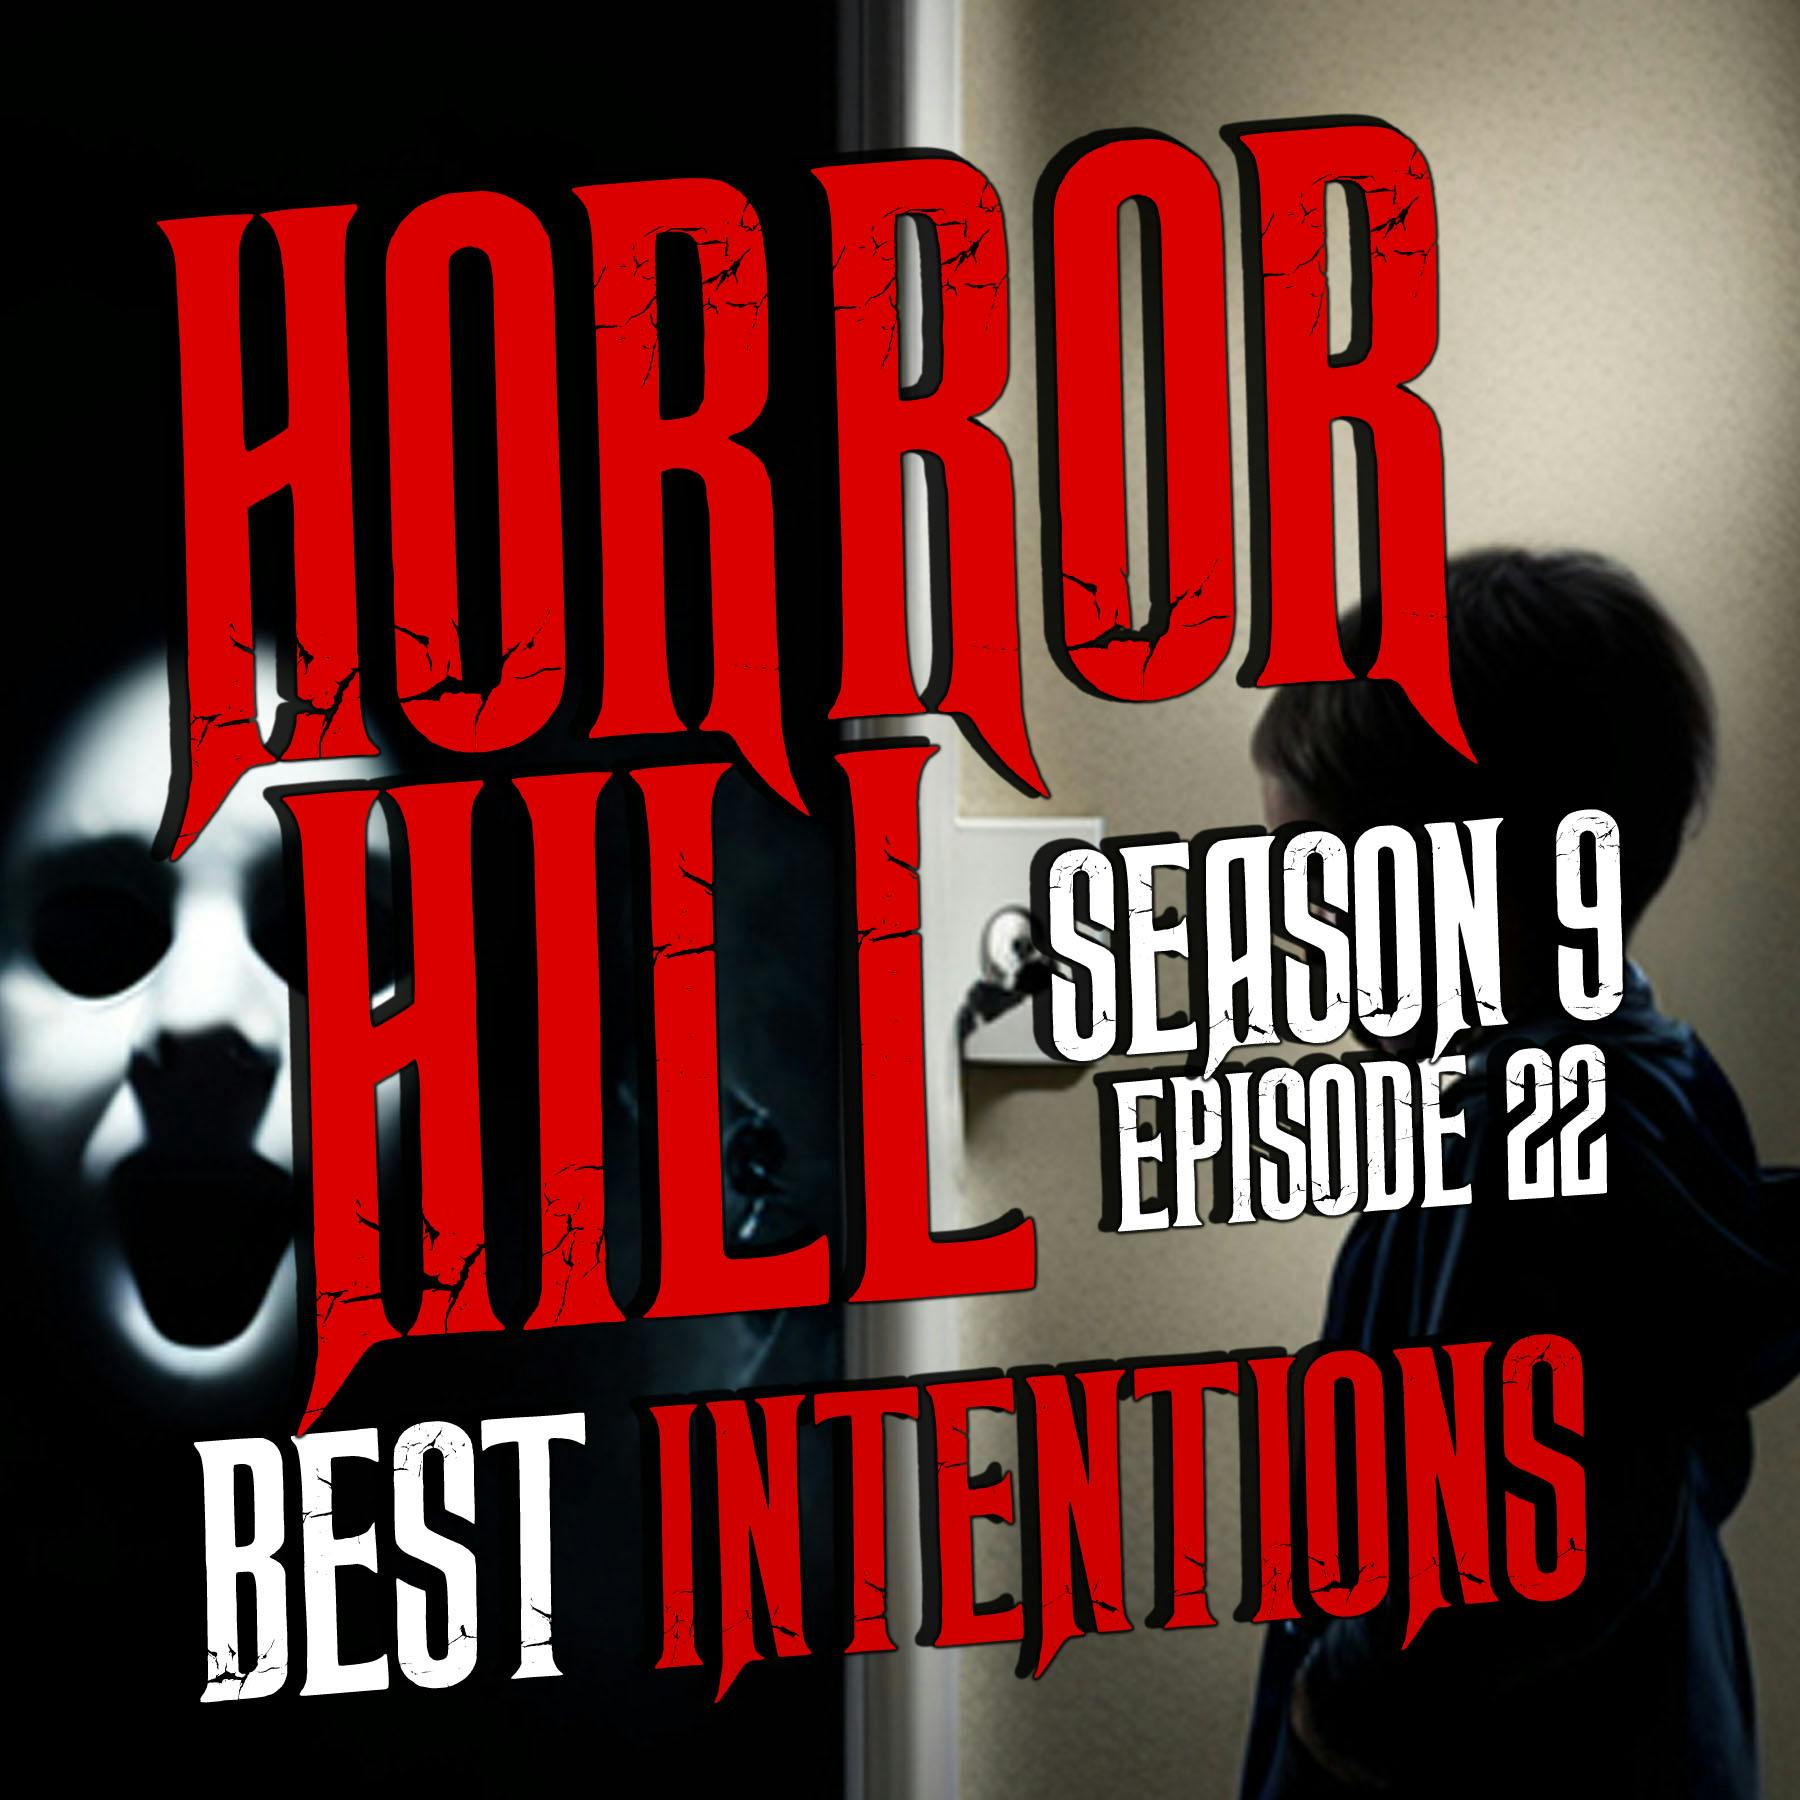 S9E22 - “Best Intentions" - Horror Hill